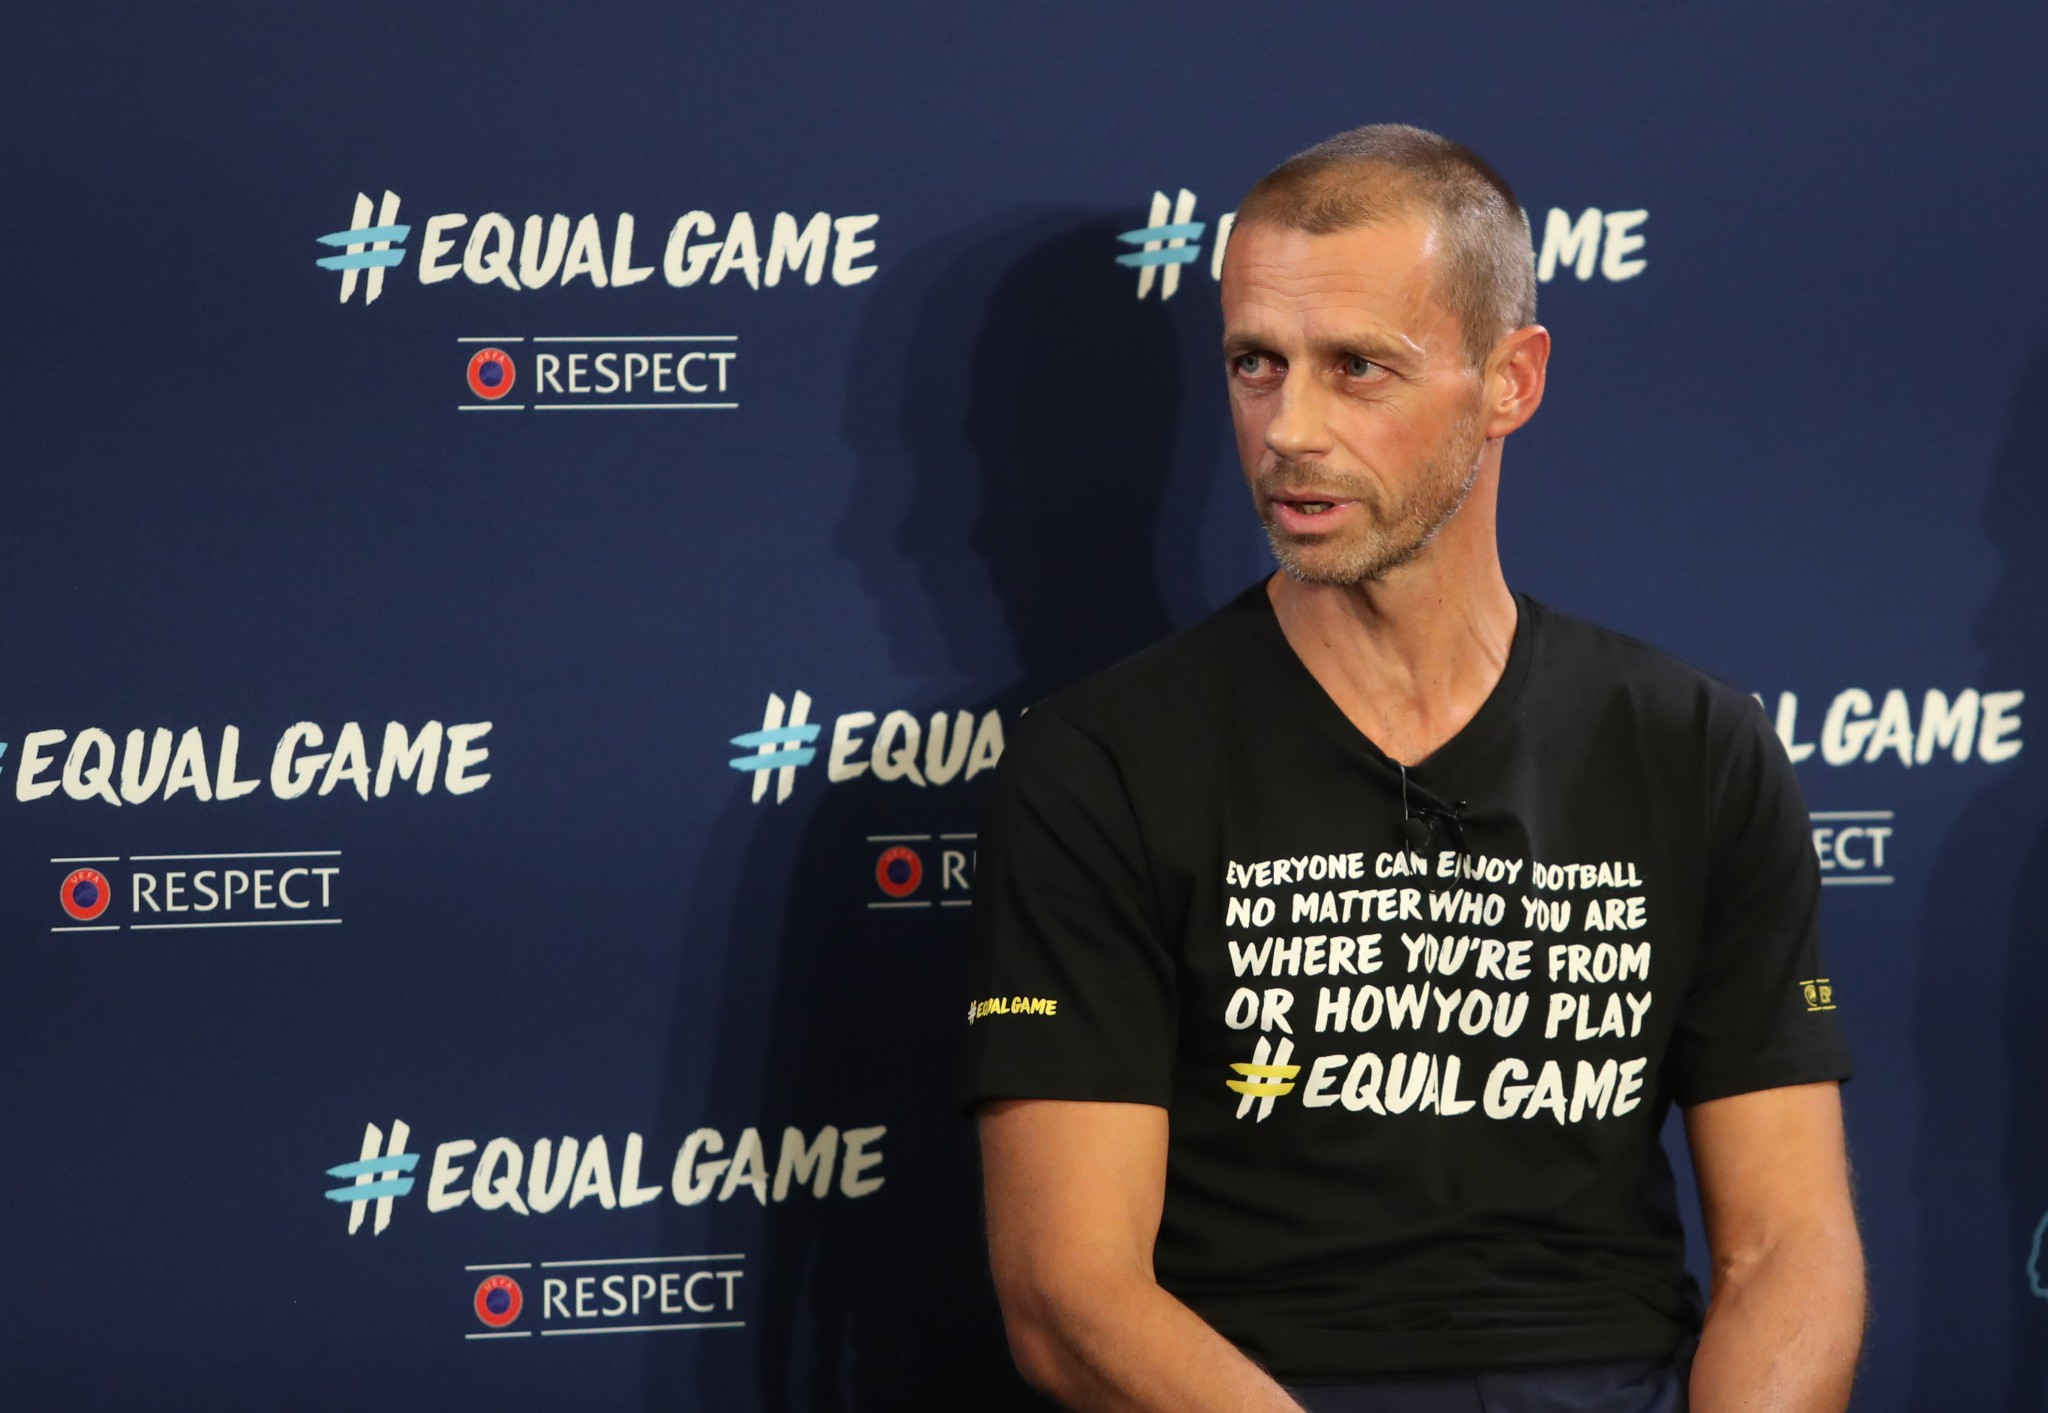 UEFA President Aleksander Čeferin has launched the UEFA campaign on inclusion in football ©UEFA